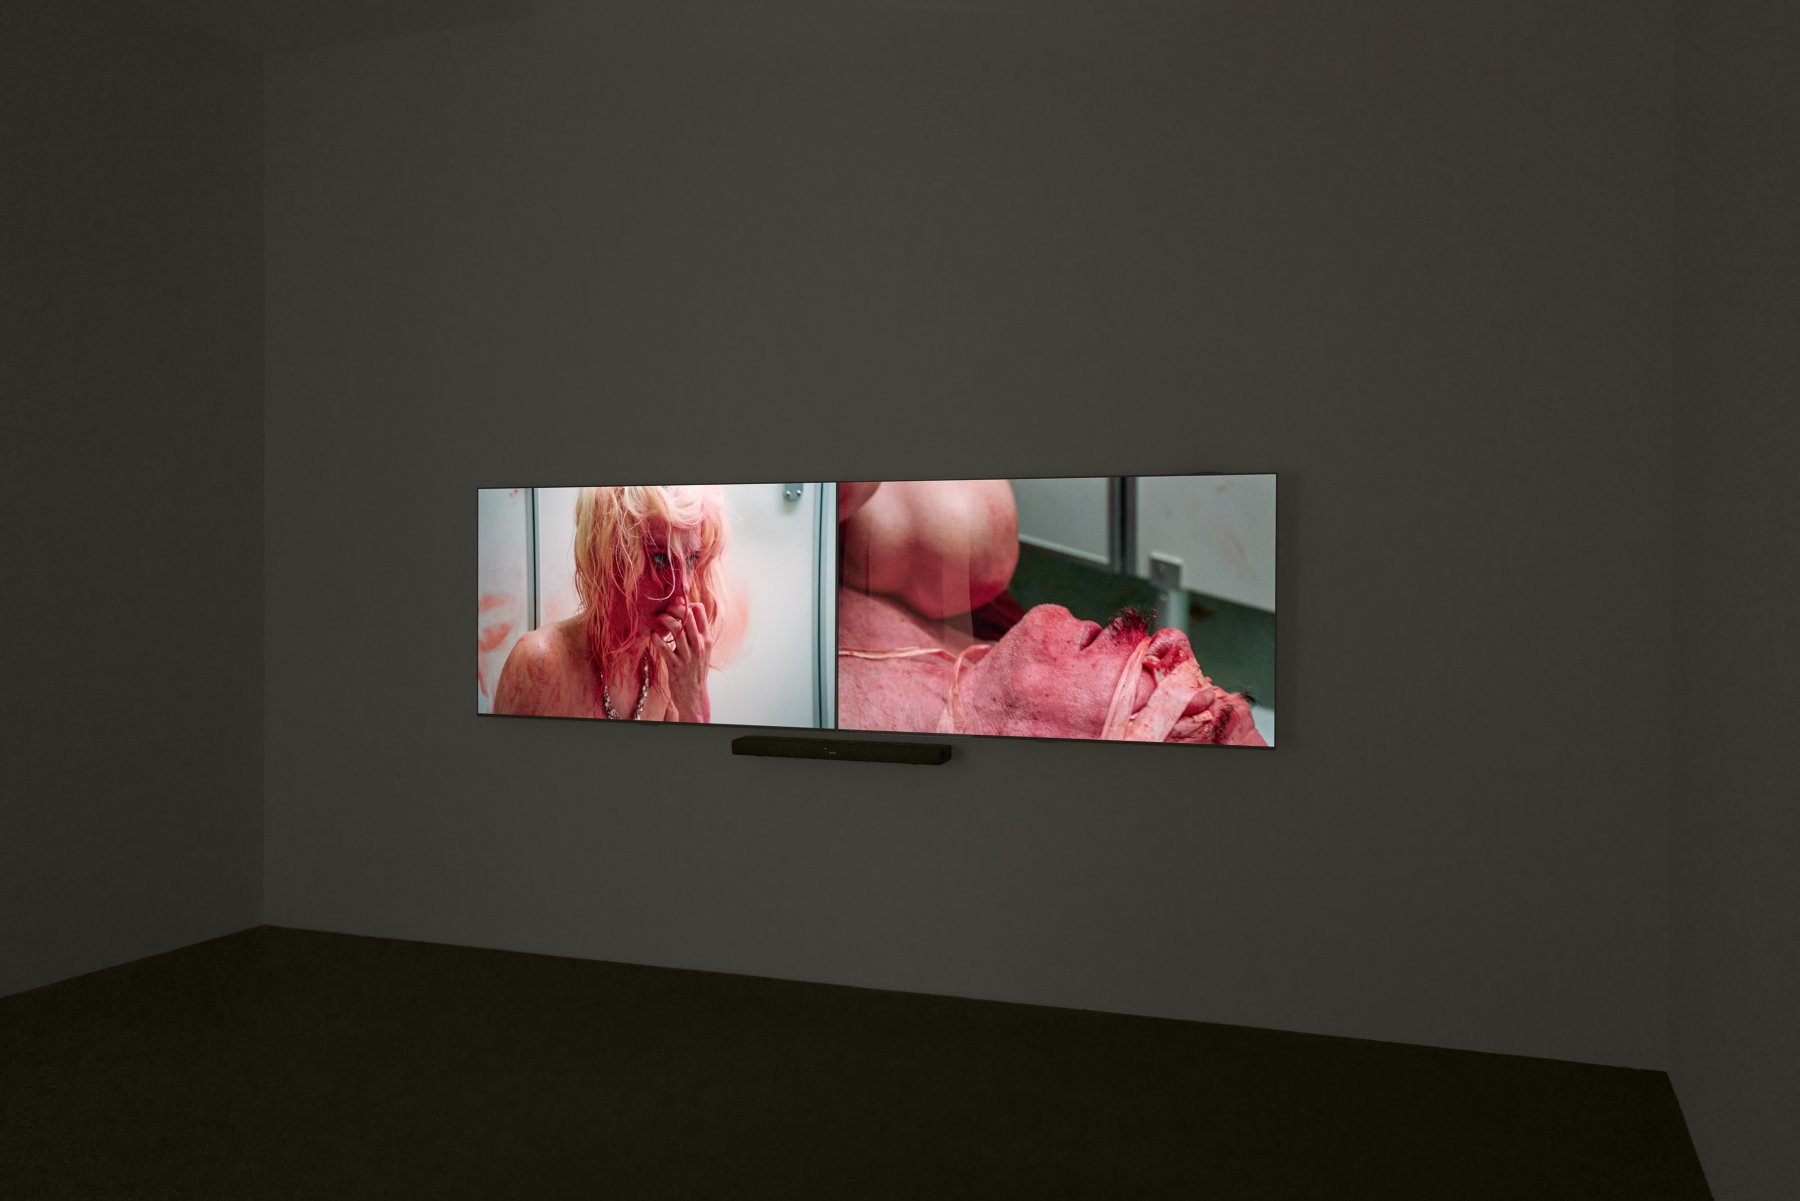 Installation image for Paul McCarthy: Them as Was Is, at Galerie Max Hetzler